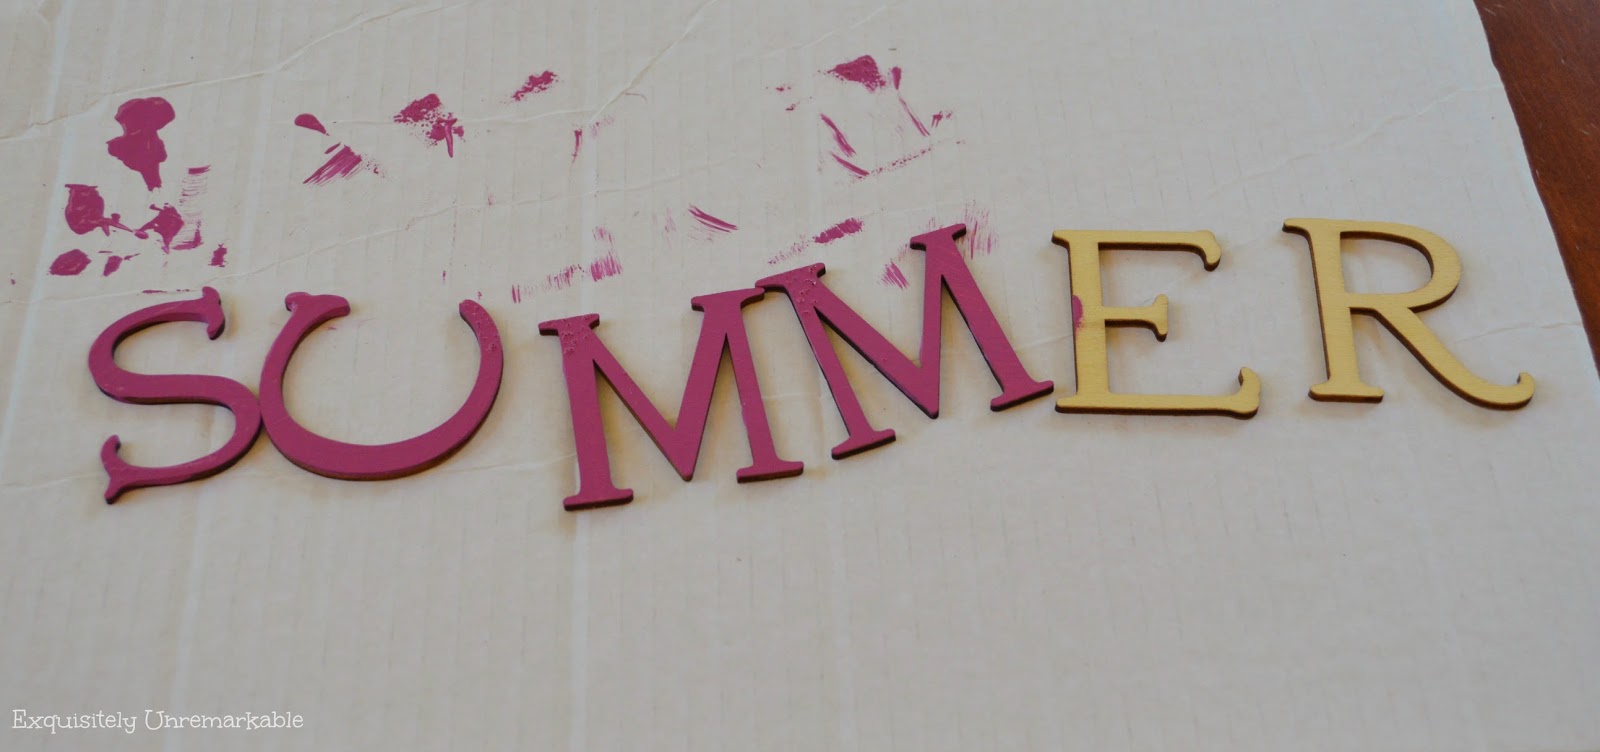 Summer spelled out in wooden letters